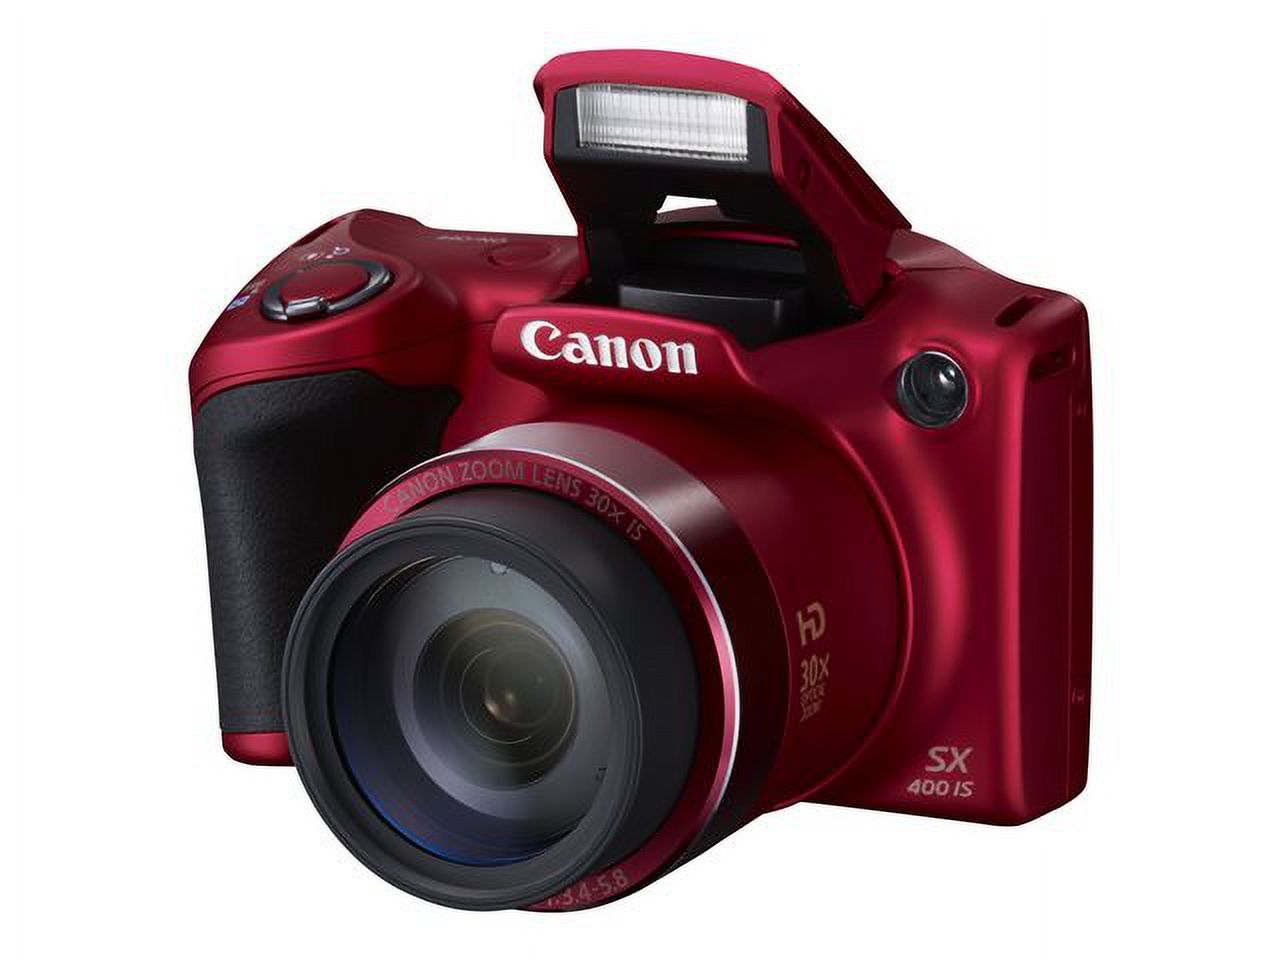 Canon PowerShot SX400 IS - Digital camera - High Definition - compact - 16.0 MP - 30 x optical zoom - red - image 23 of 72